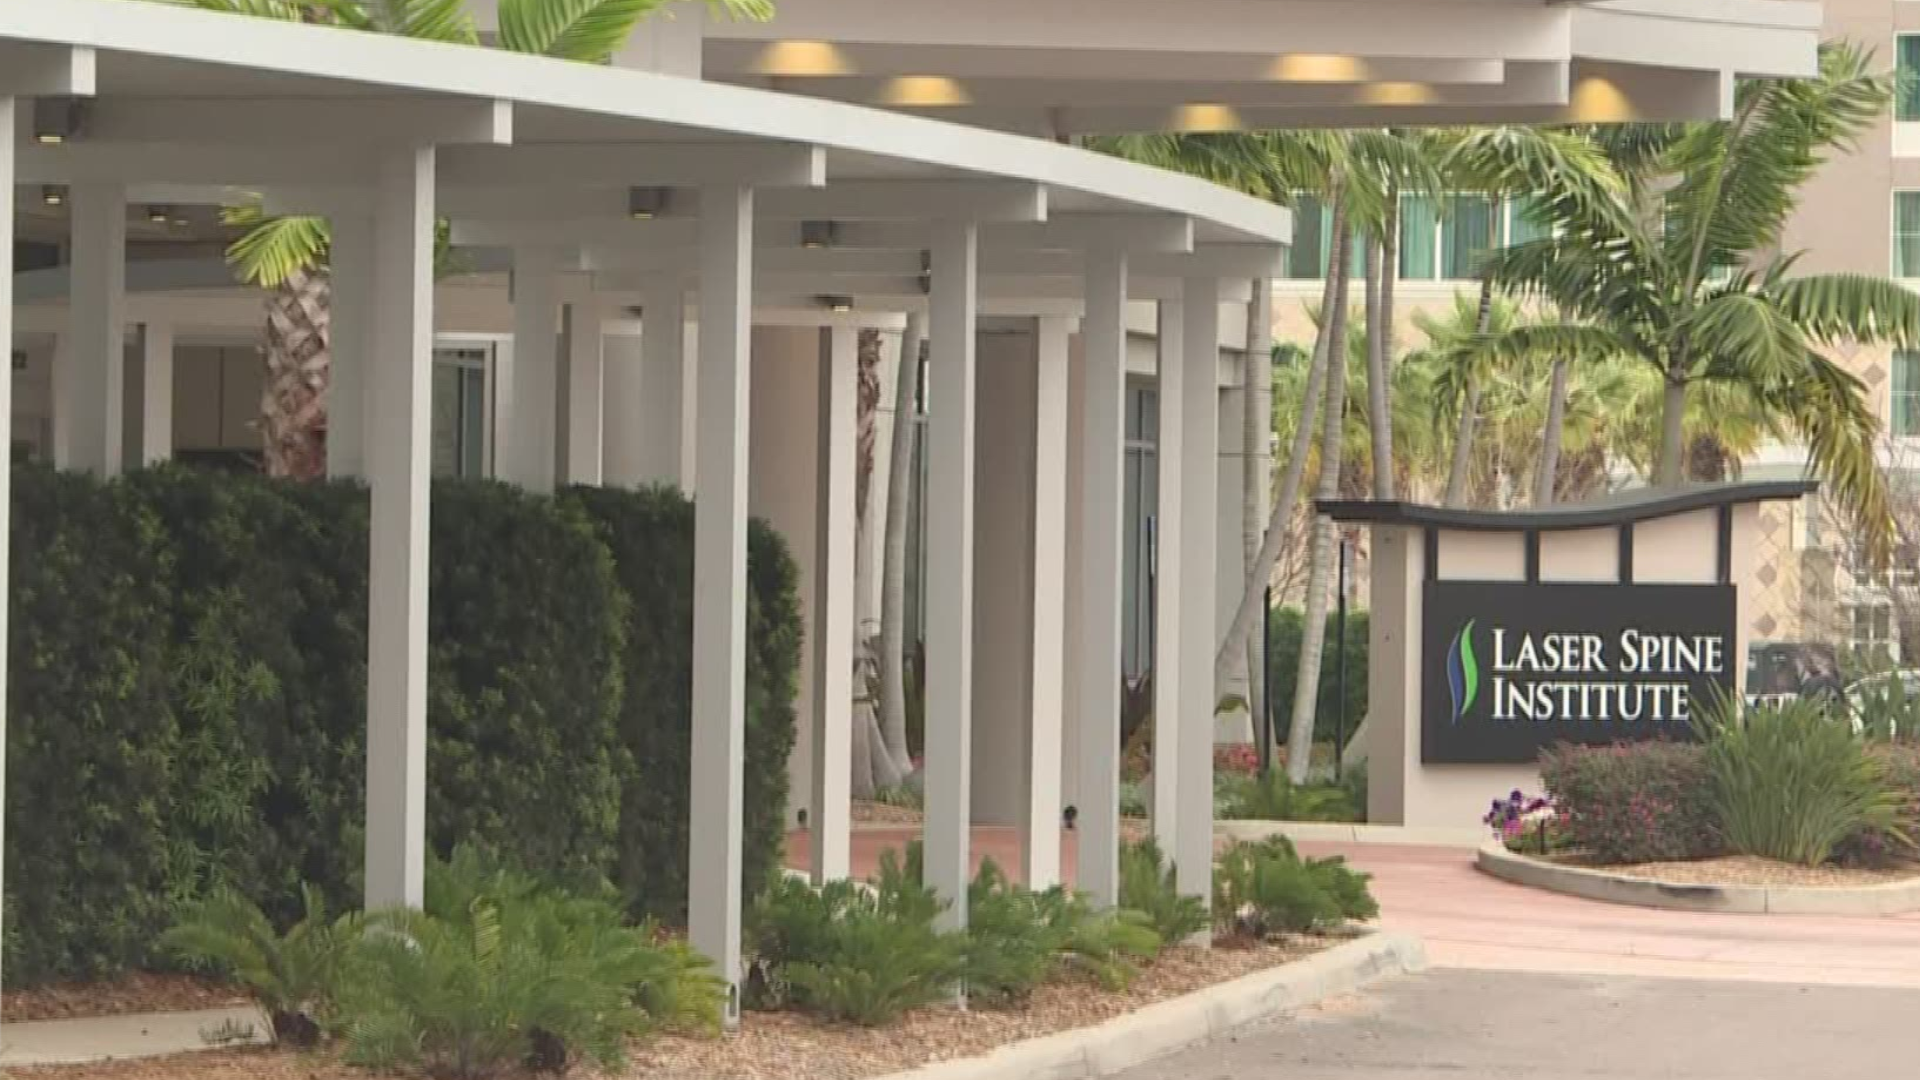 The company abruptly shut its doors for good and canceled all appointments Friday afternoon, blaming financial problems. Some patients, like Loosenort, came to Tampa from out-of-state for surgery, only to get the call saying their appointments have been canceled.